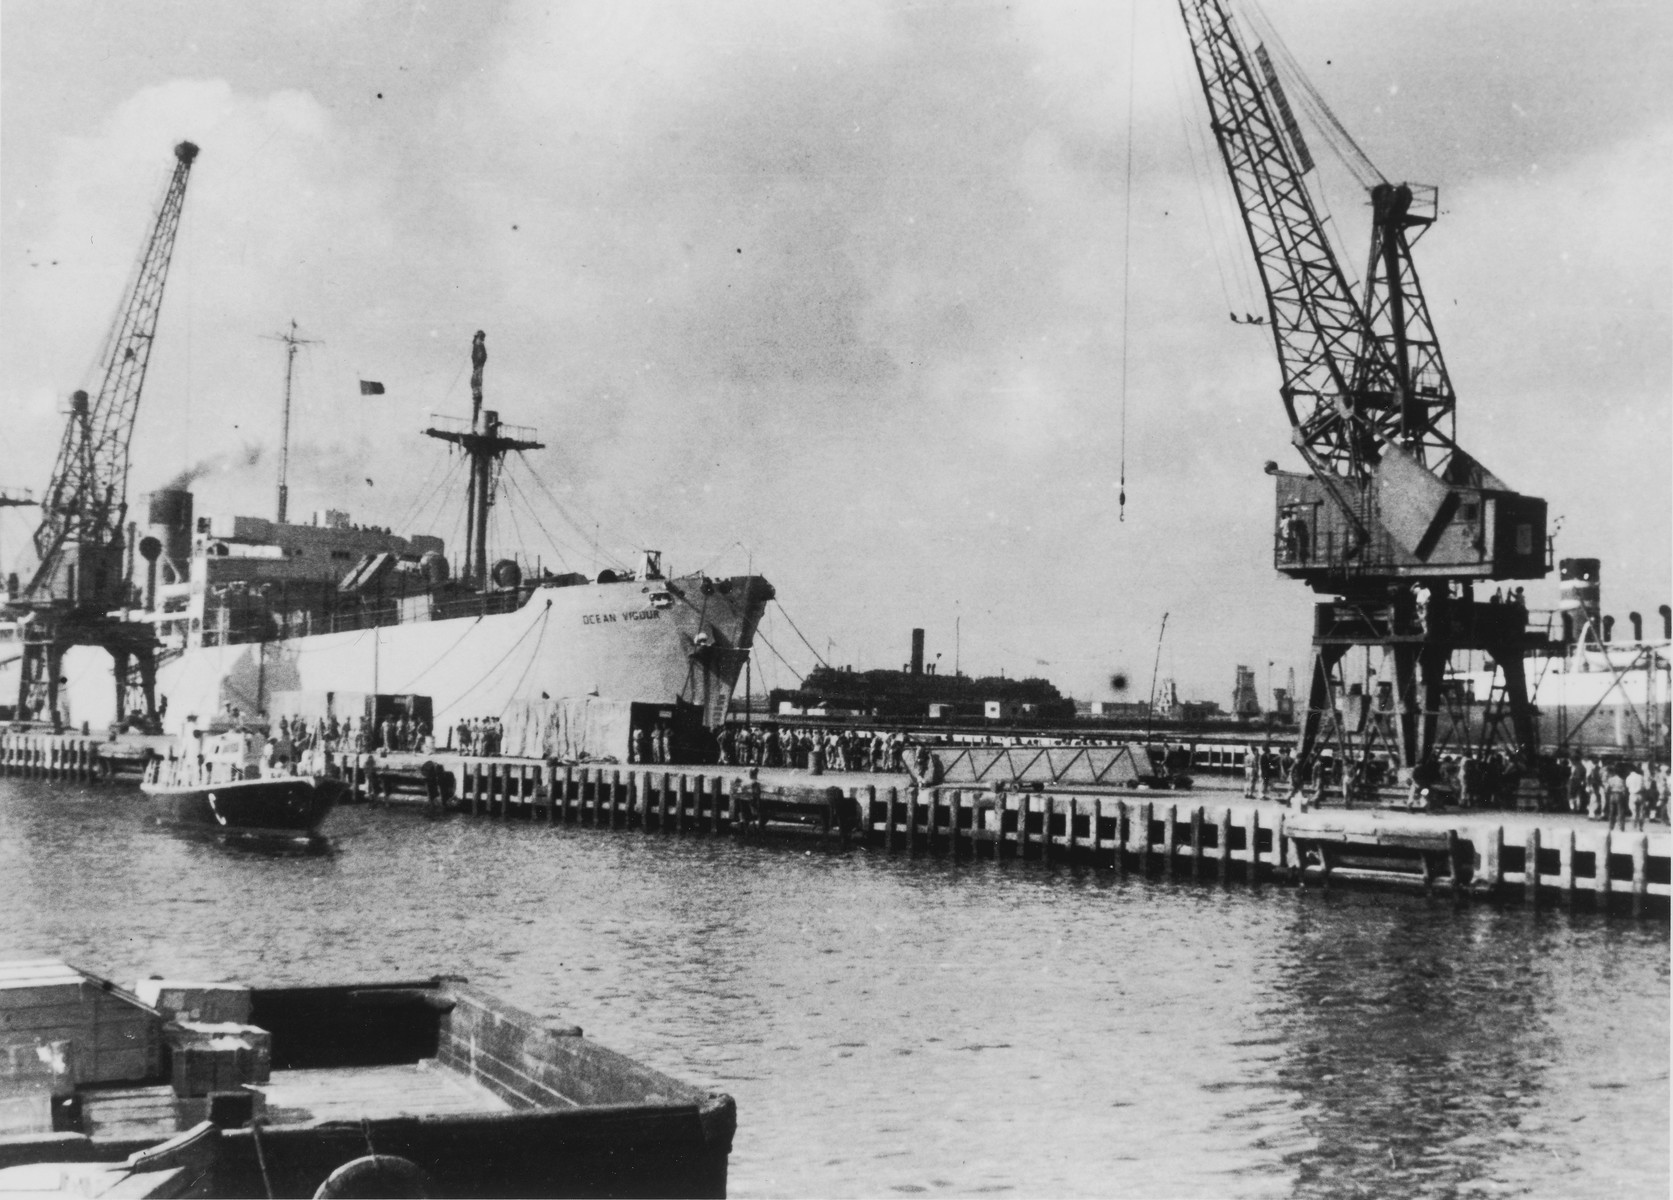 The British "comfort ship," Ocean Vigour, stands in Haifa harbor ready to receive the passengers of the illegal immigrant ship, Exodus 1947.